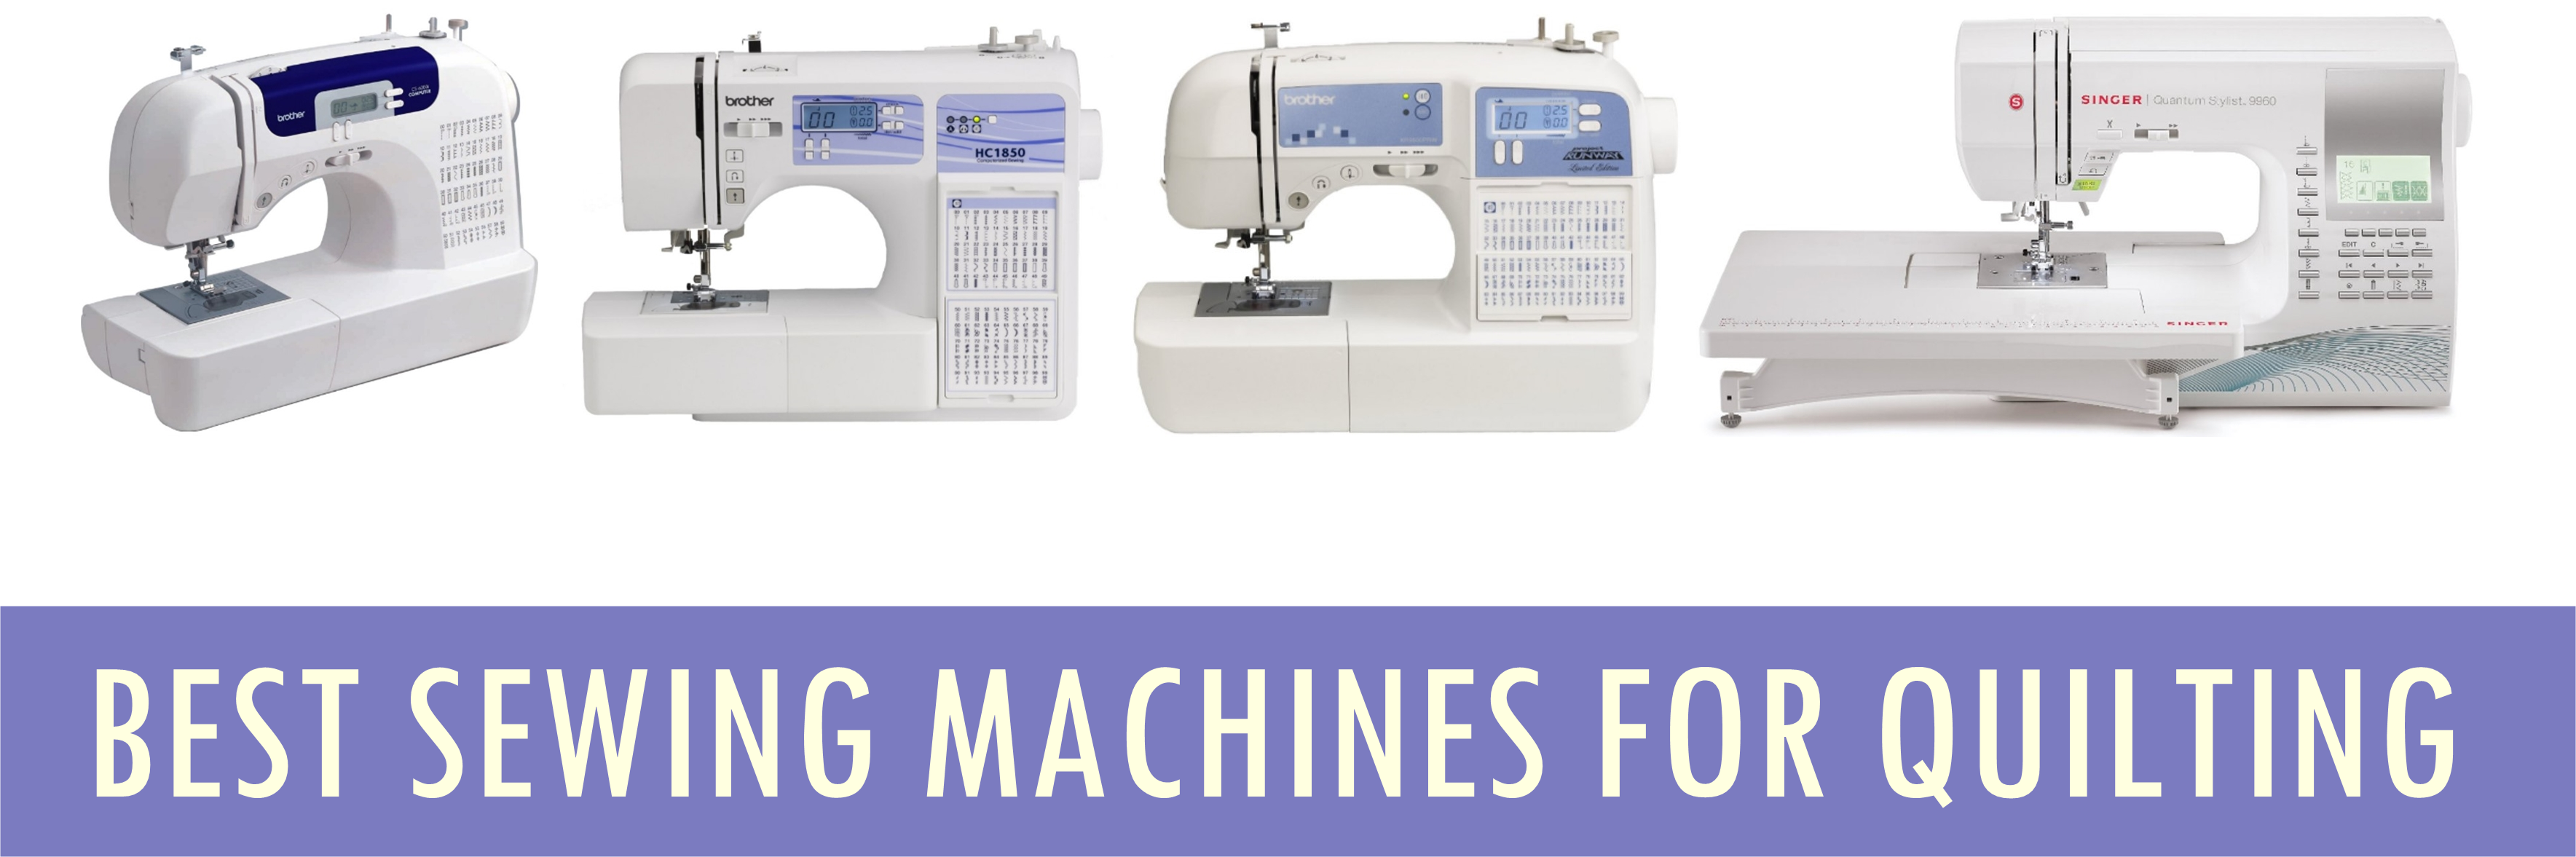 Best Sewing Machine for Quilting 2018